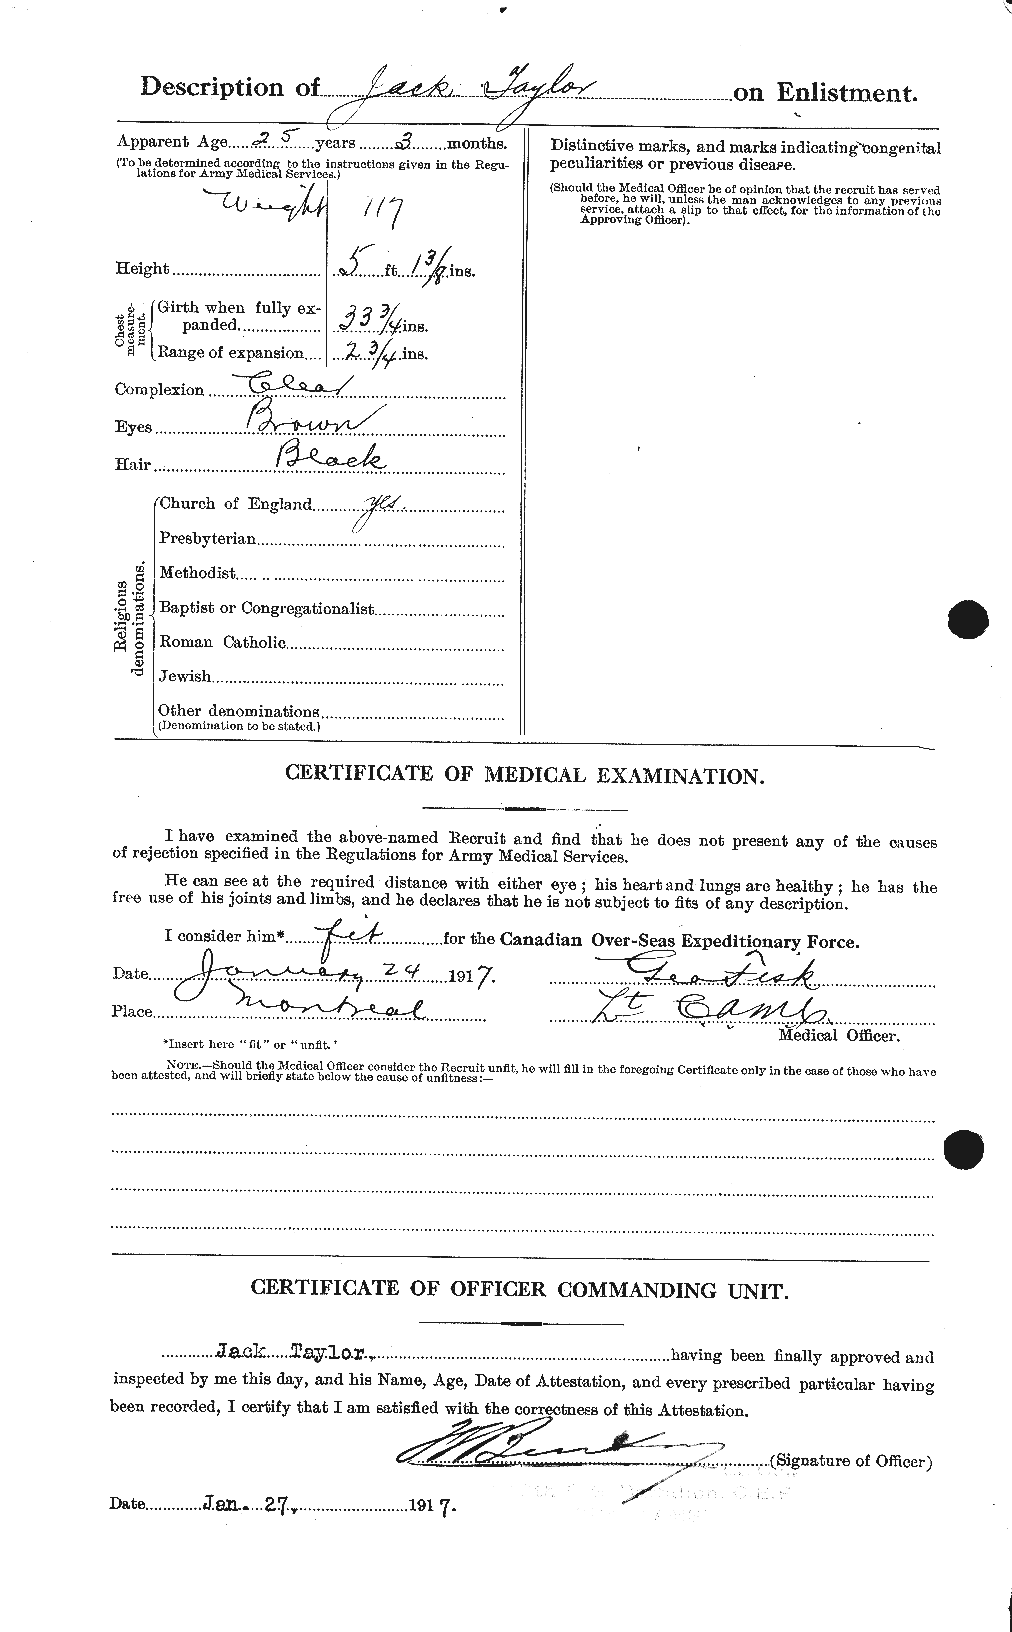 Personnel Records of the First World War - CEF 627050b